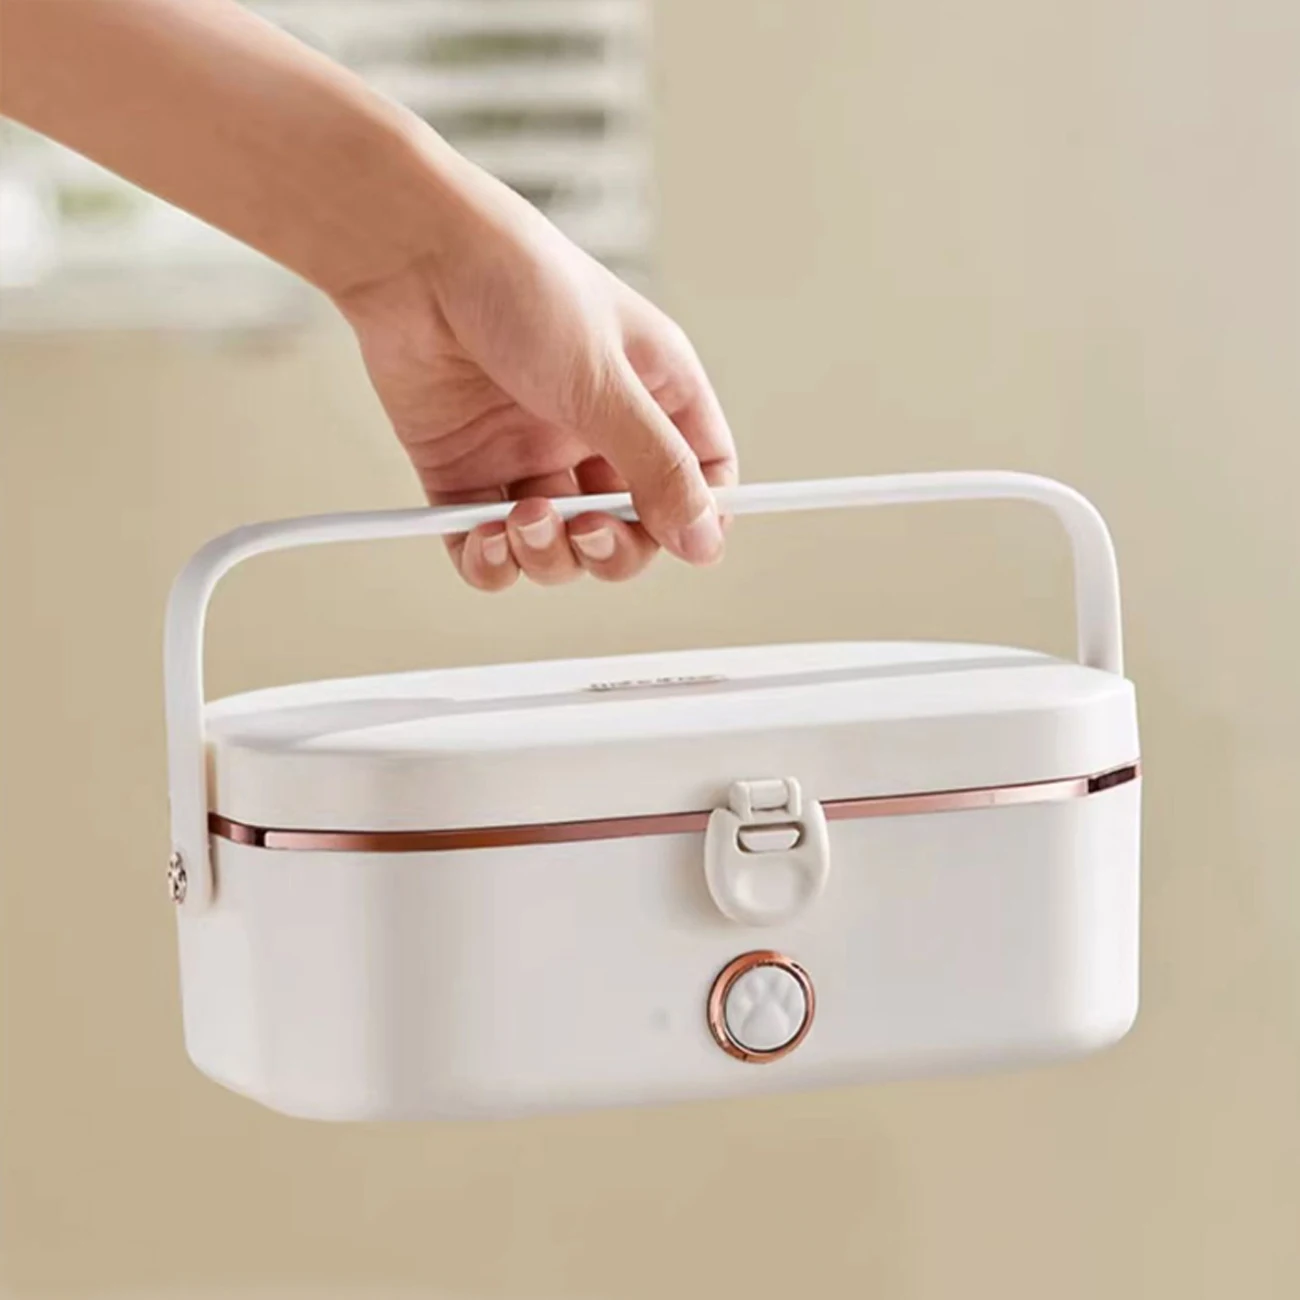 

1000ml Electric Lunch Box Water Free Bento Box Portable Rice Cooker Thermostatic Heating Food Warmer Cooking Container 75W